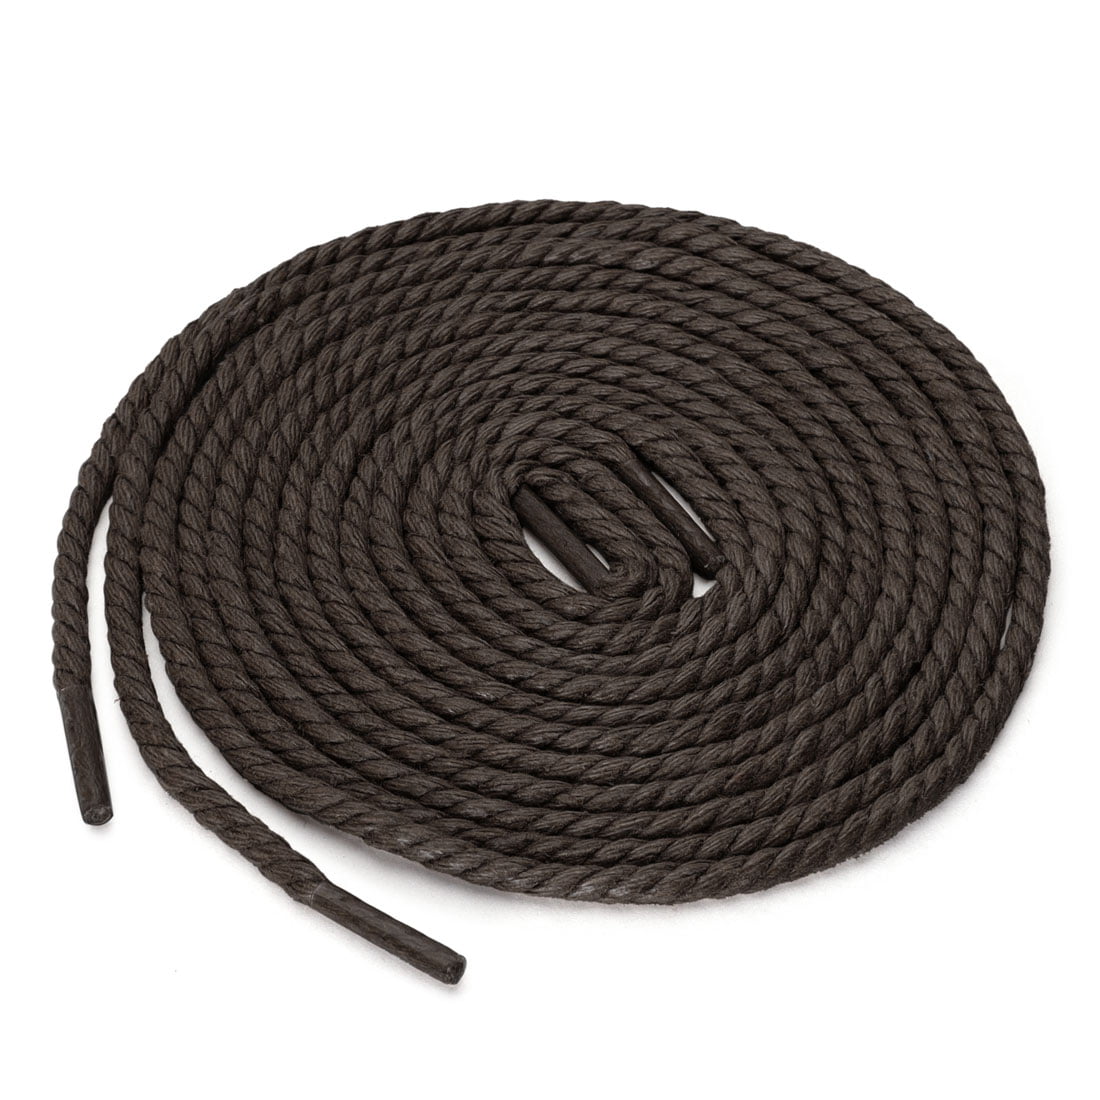 Wax Cotton Thin Round Dress Shoelaces Black Brown Waxed Cord Laces 80 100 120 cm 